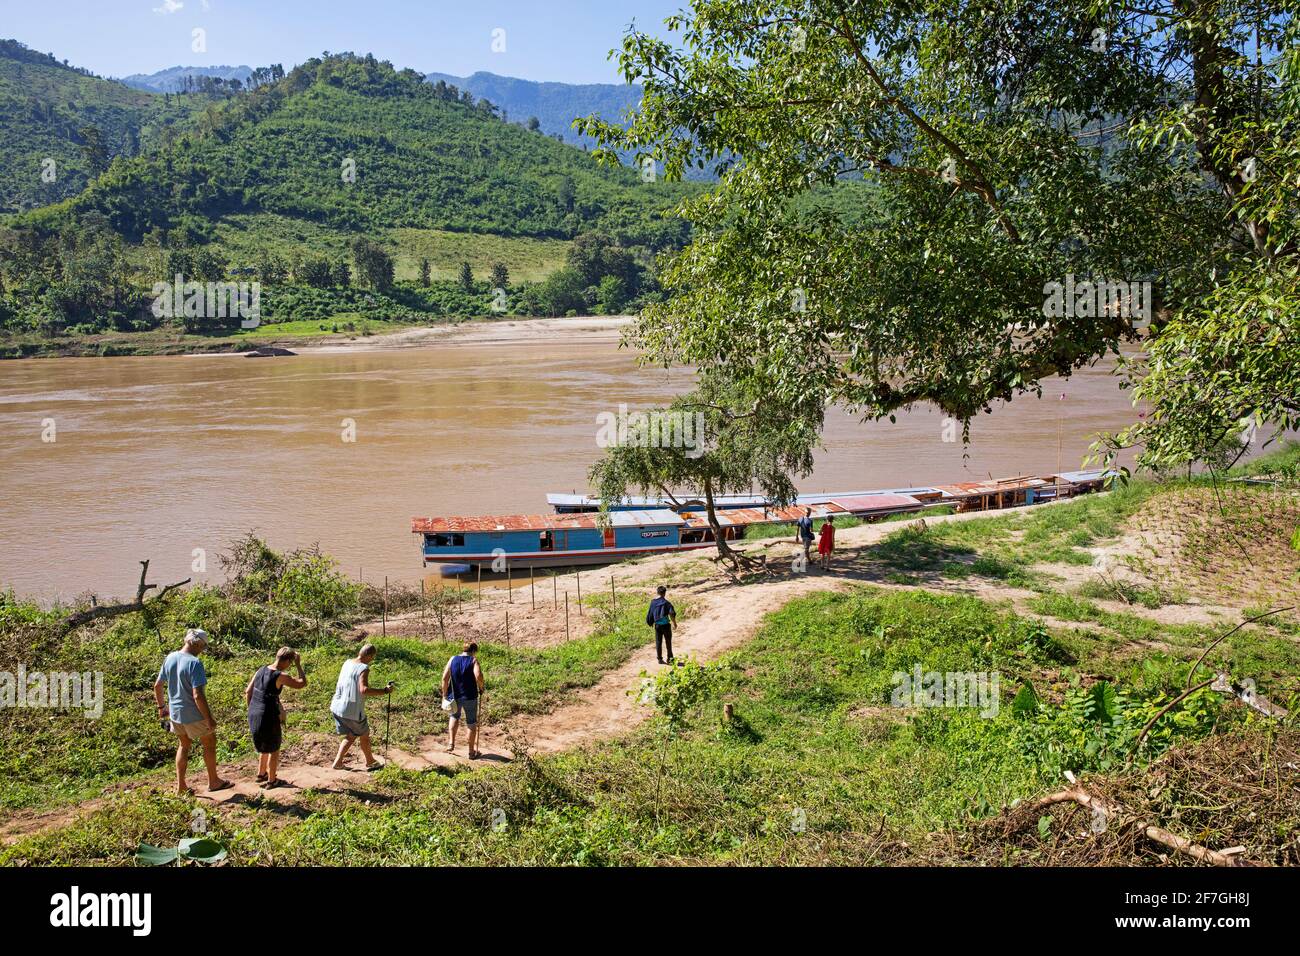 Western tourists visiting the valley of the Mekong River by taking a slowboat trip / slow boat cruise to Luang Phabang / Luang Prabang, Laos Stock Photo